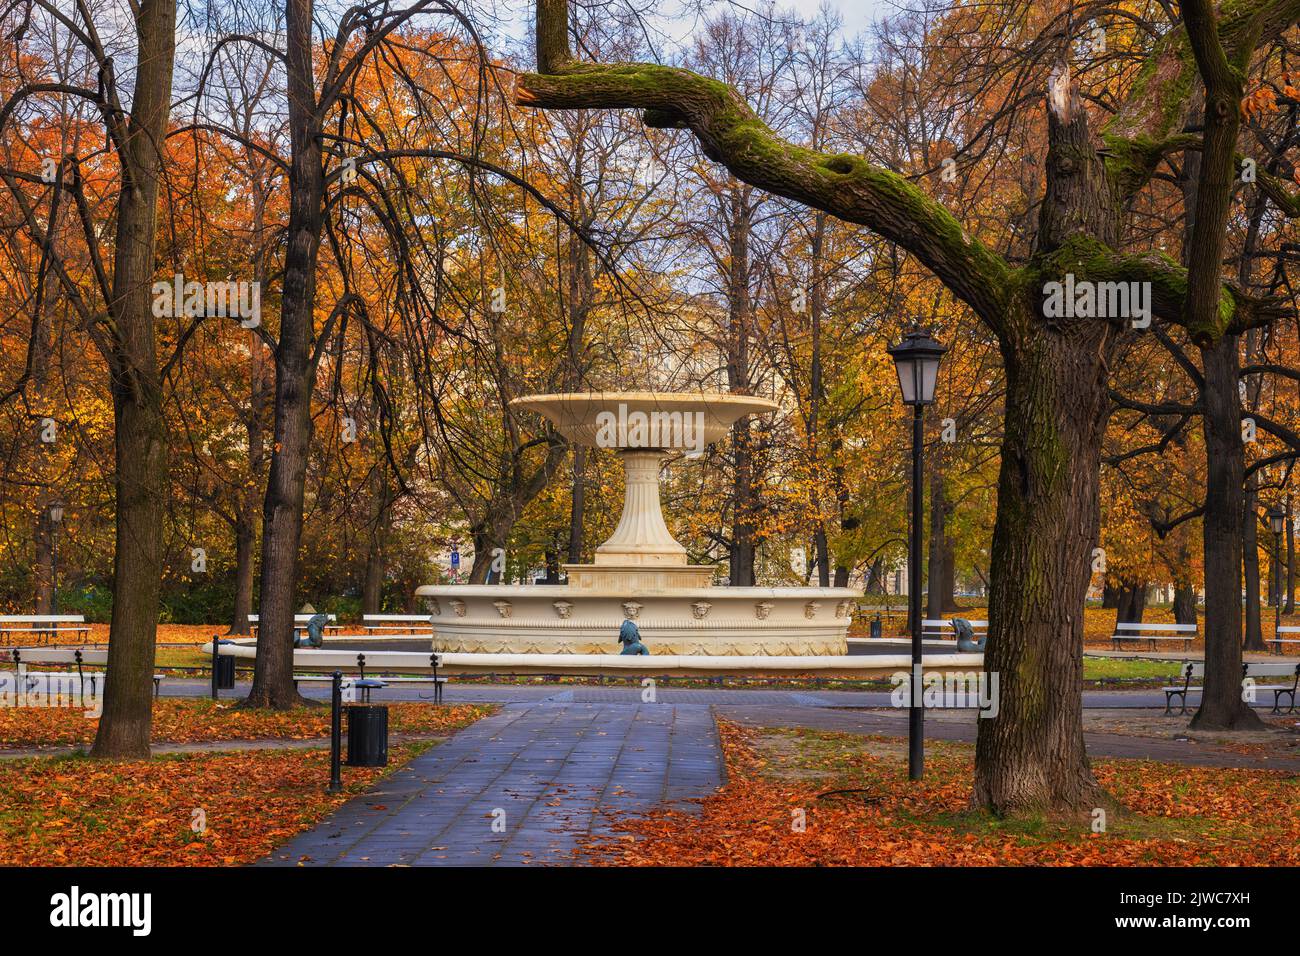 Autumn in the Saxon Garden in Warsaw, Poland. Historic park in the city center with 19th century fountain. Stock Photo